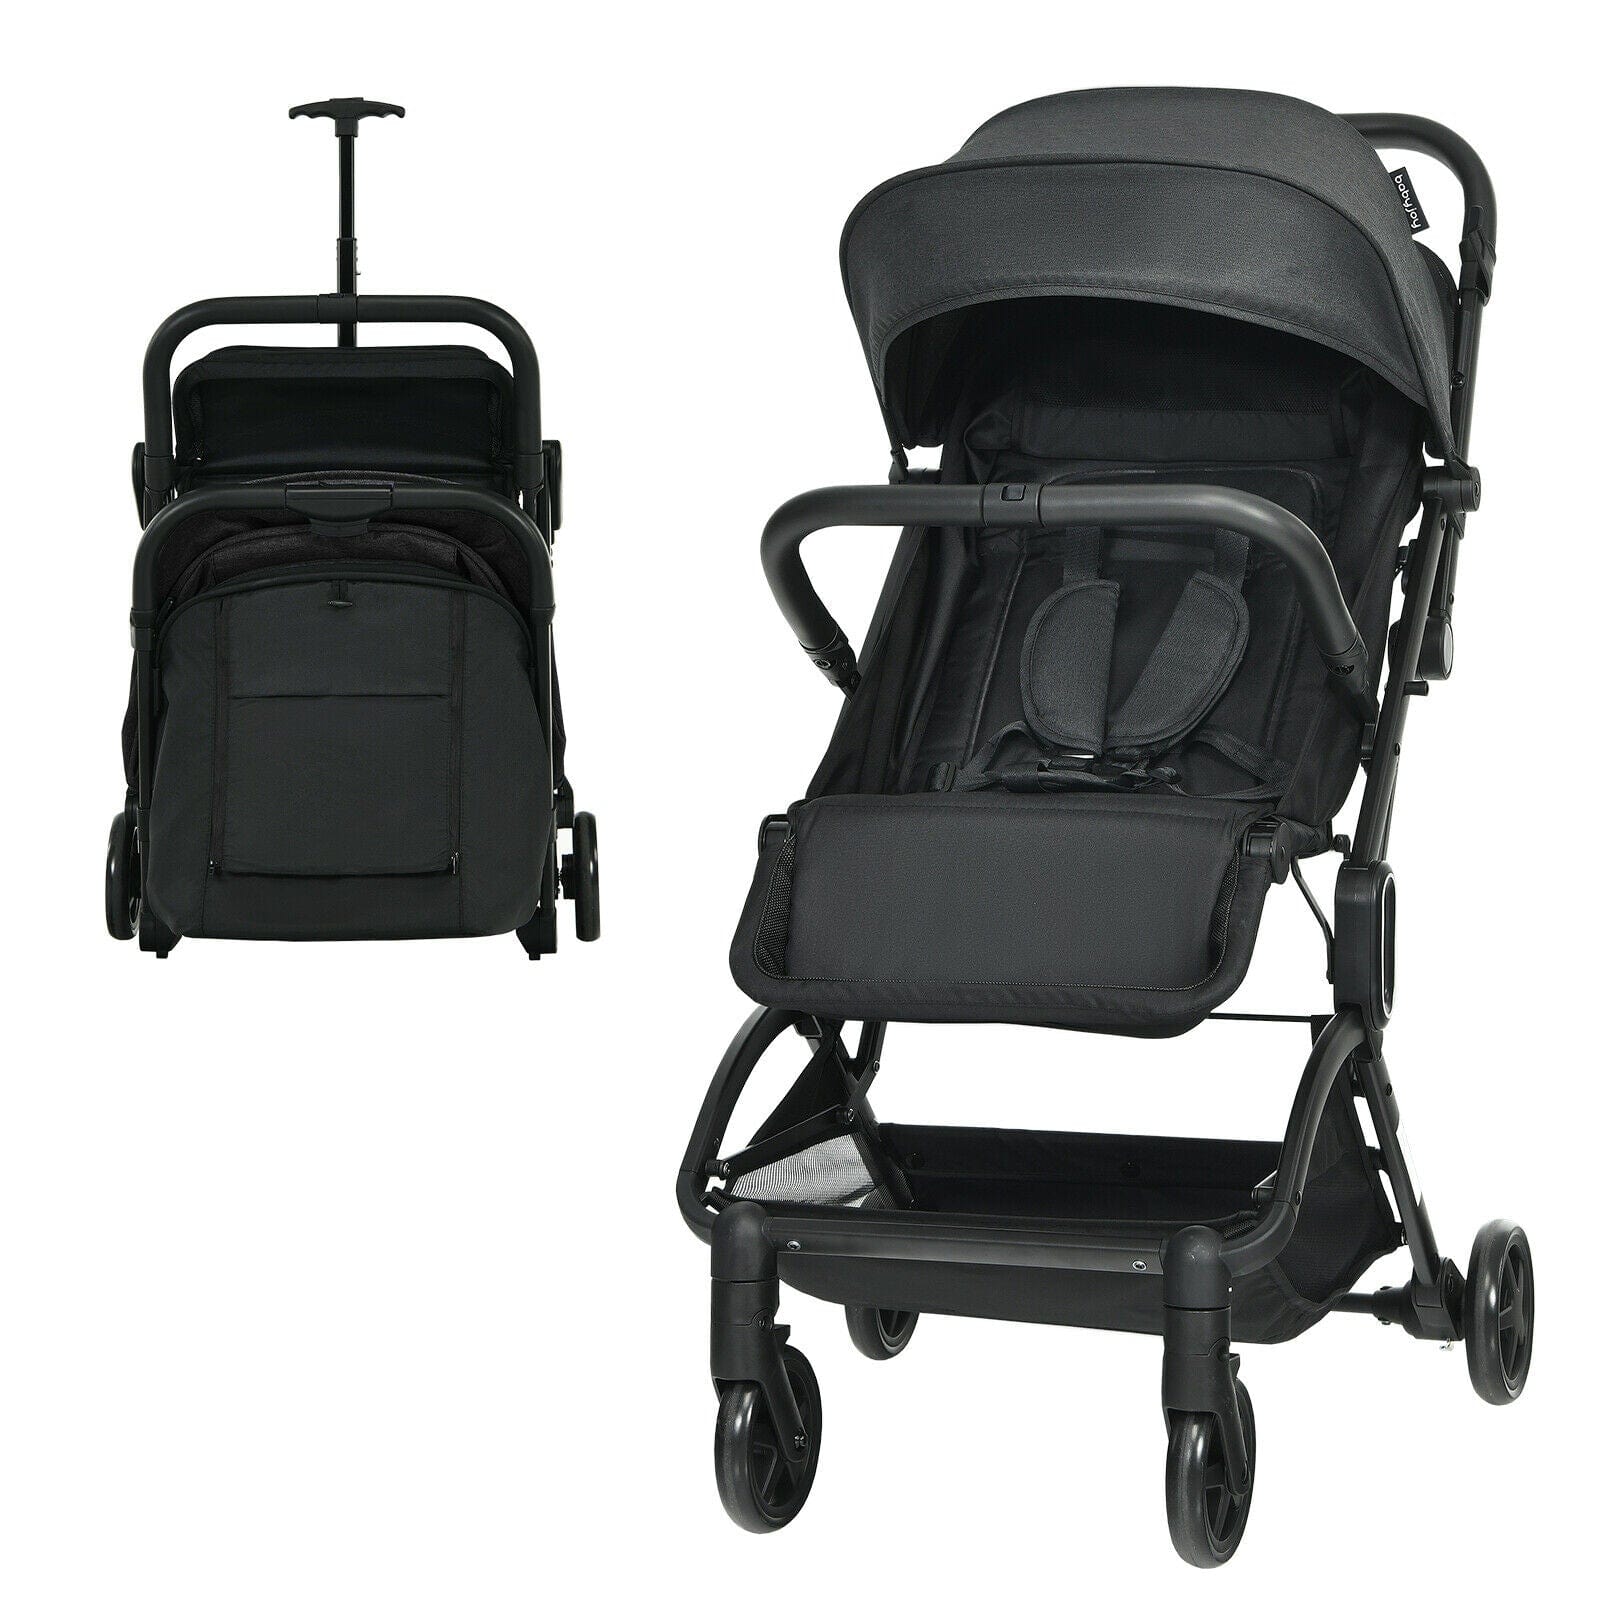 Proactive Baby Baby Strollers Gray Baby-Joy Fly&Go™ Light-weight Baby Stroller I Perfect Travel Baby Pram or Stroller